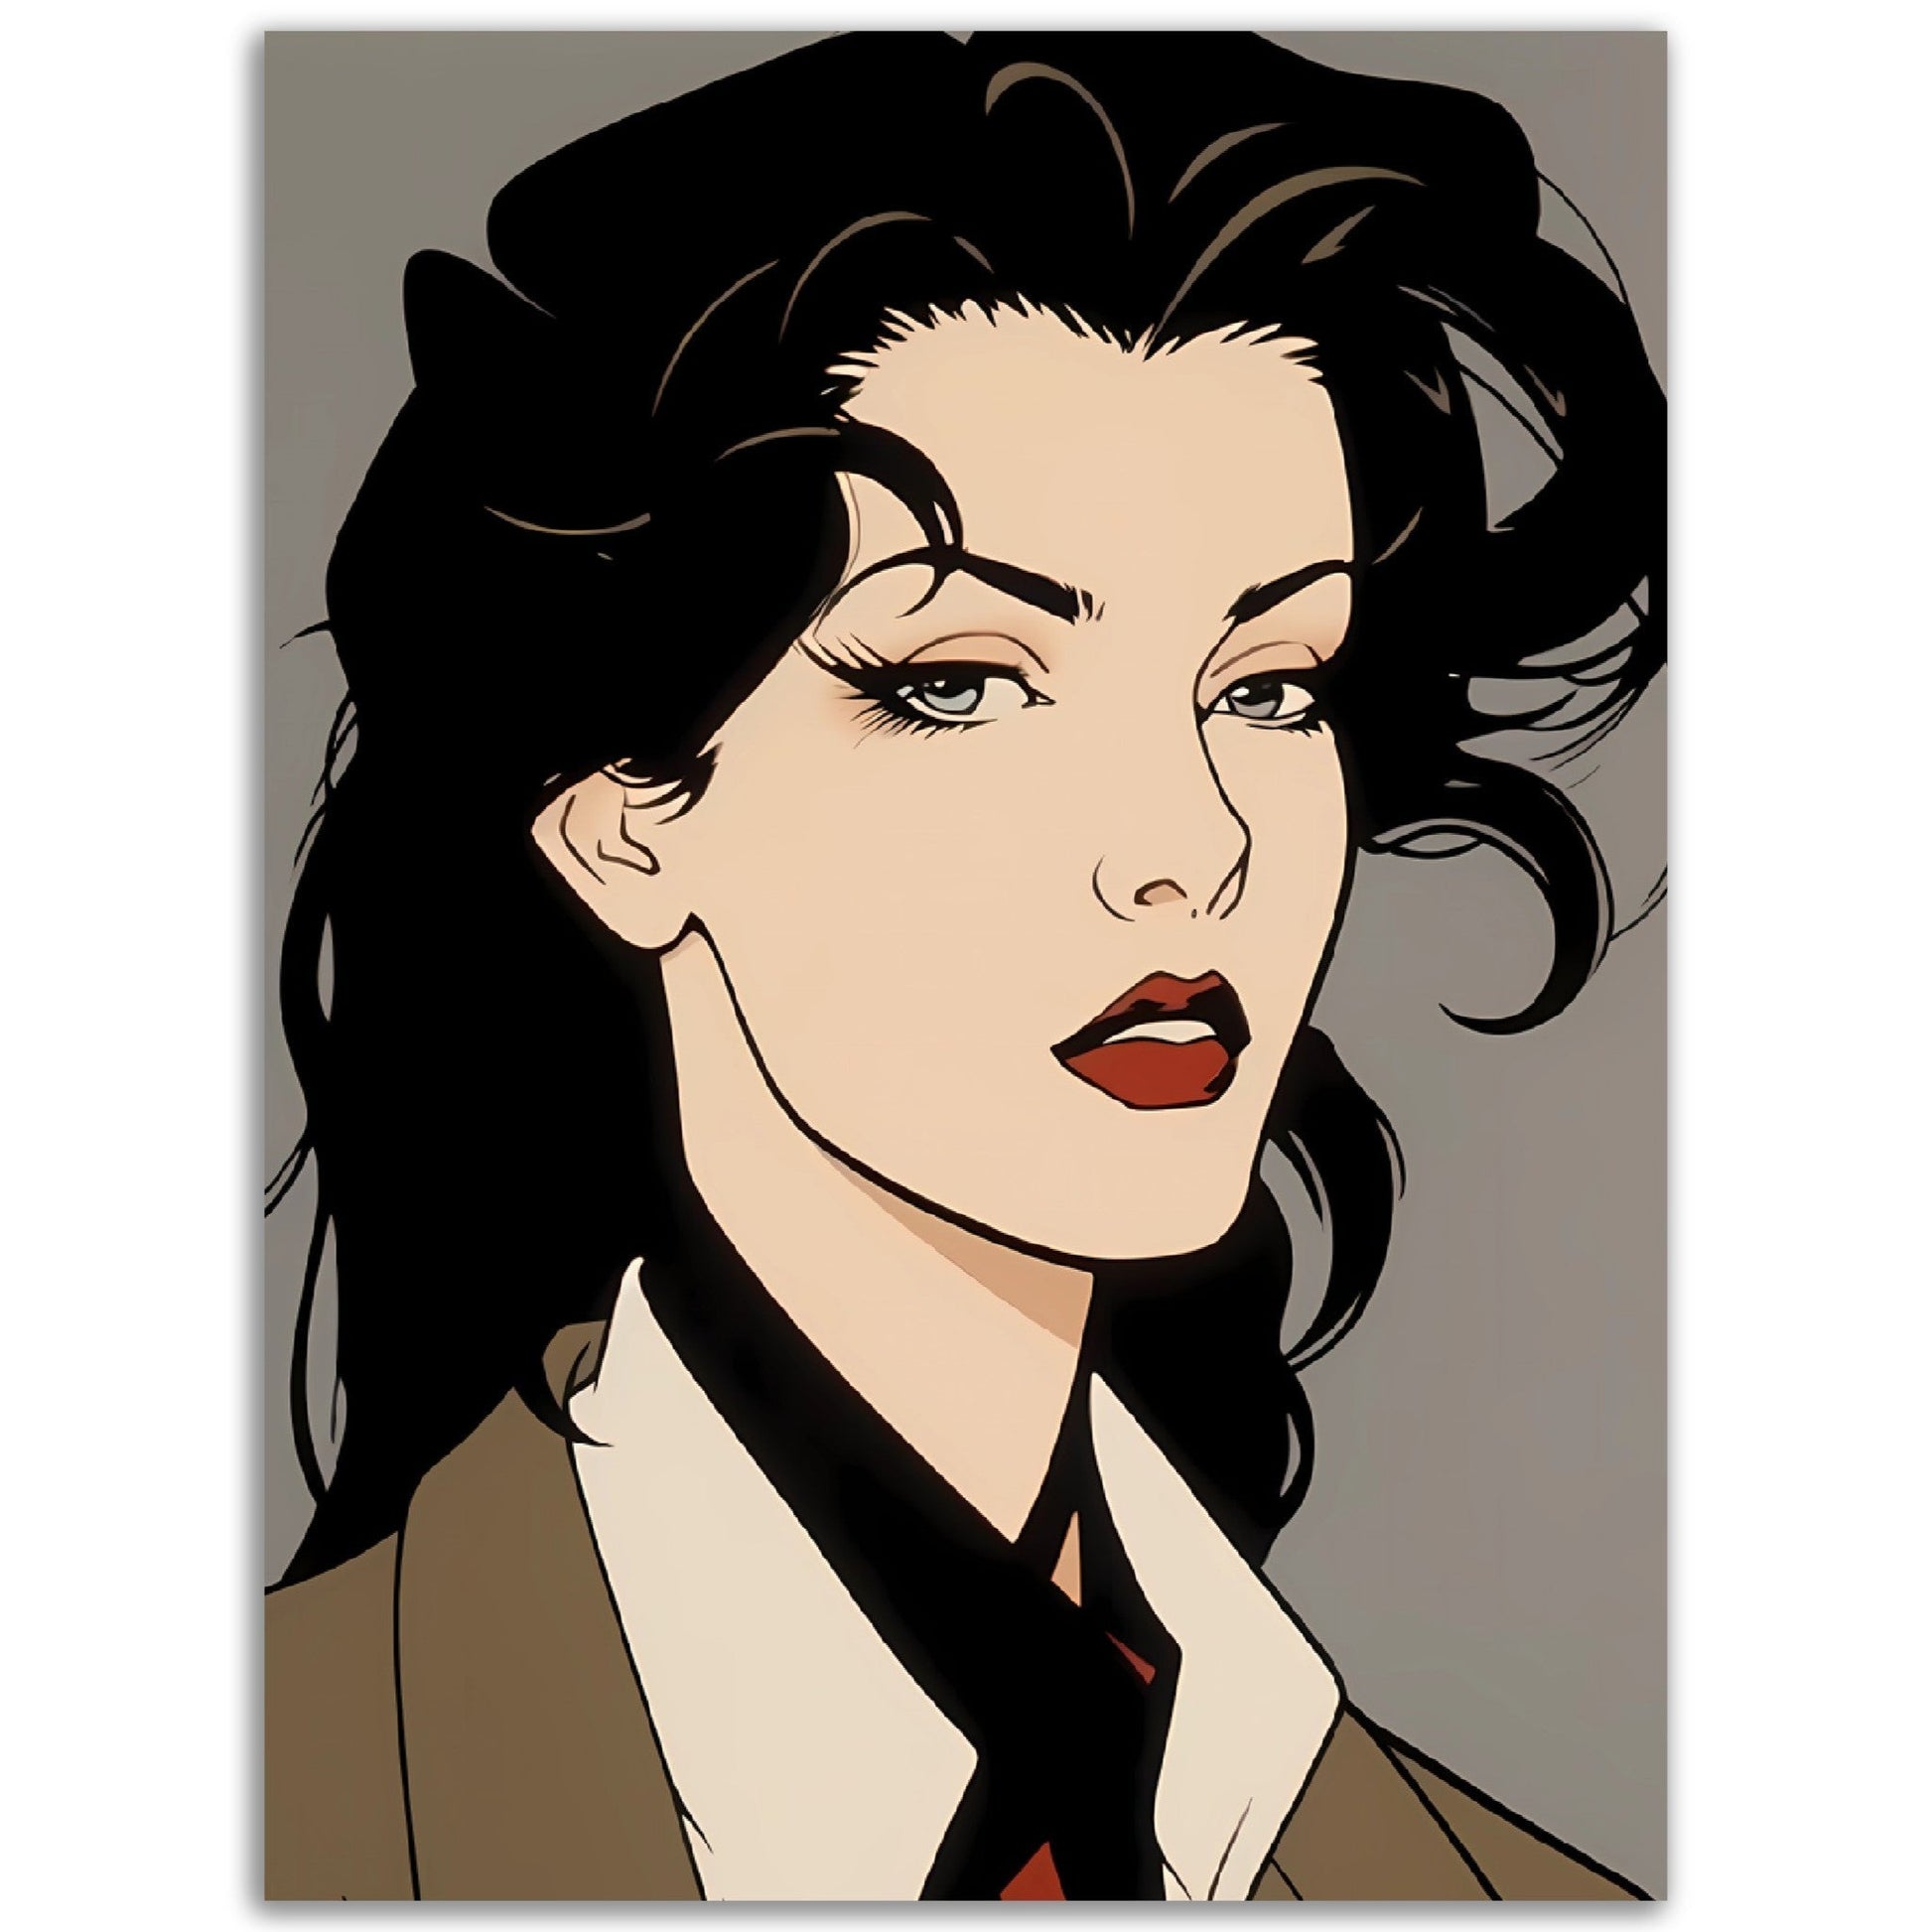 A black and white drawing of a woman in a suit, available as high quality Retro Diana posters.